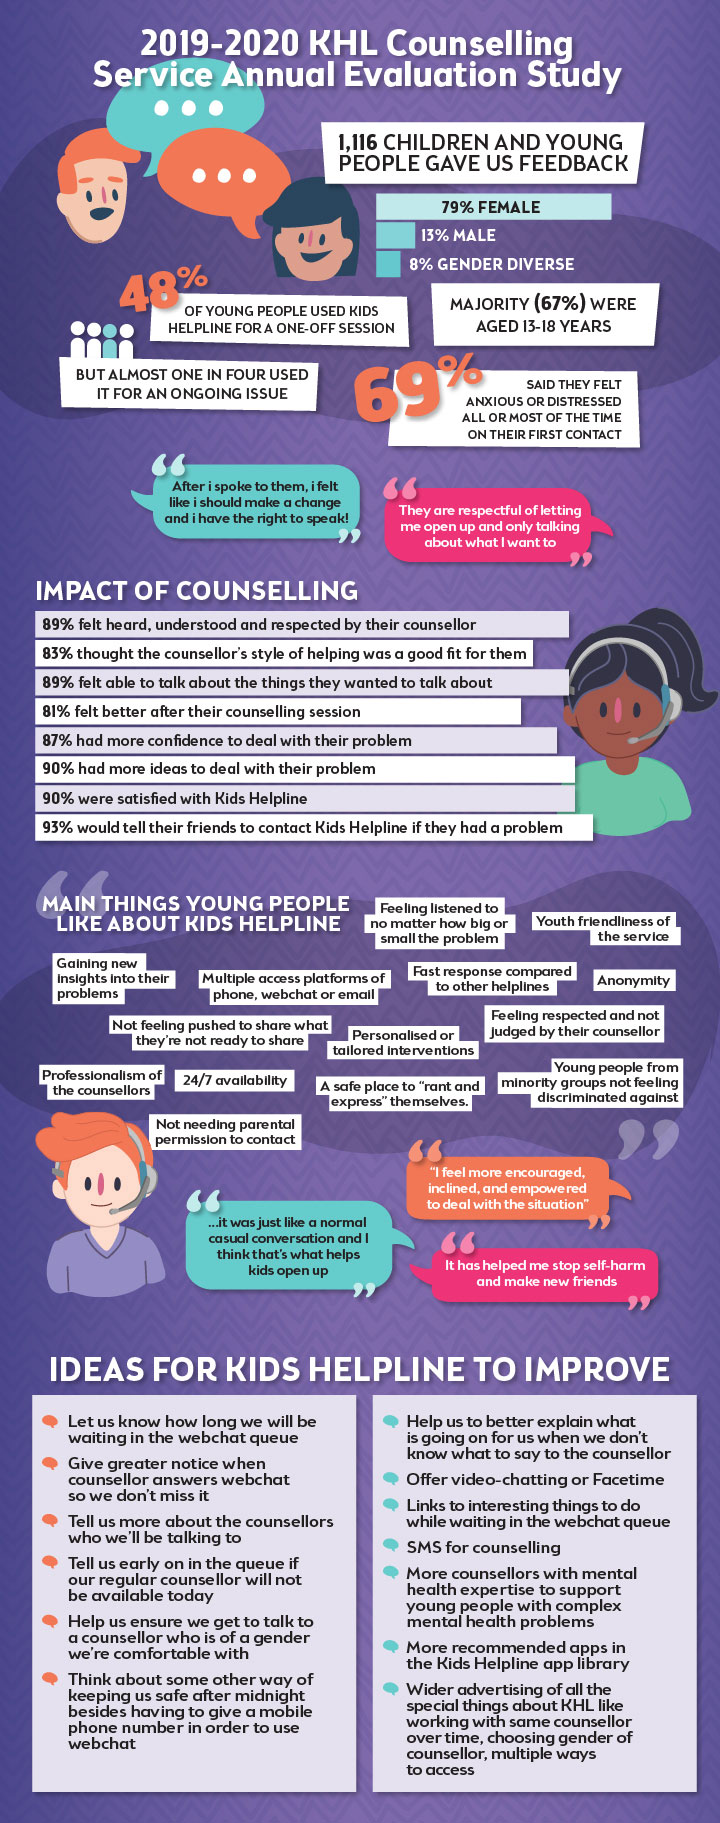 Kids Helpline Annual Counselling Service Evaluation Study Results Infographic